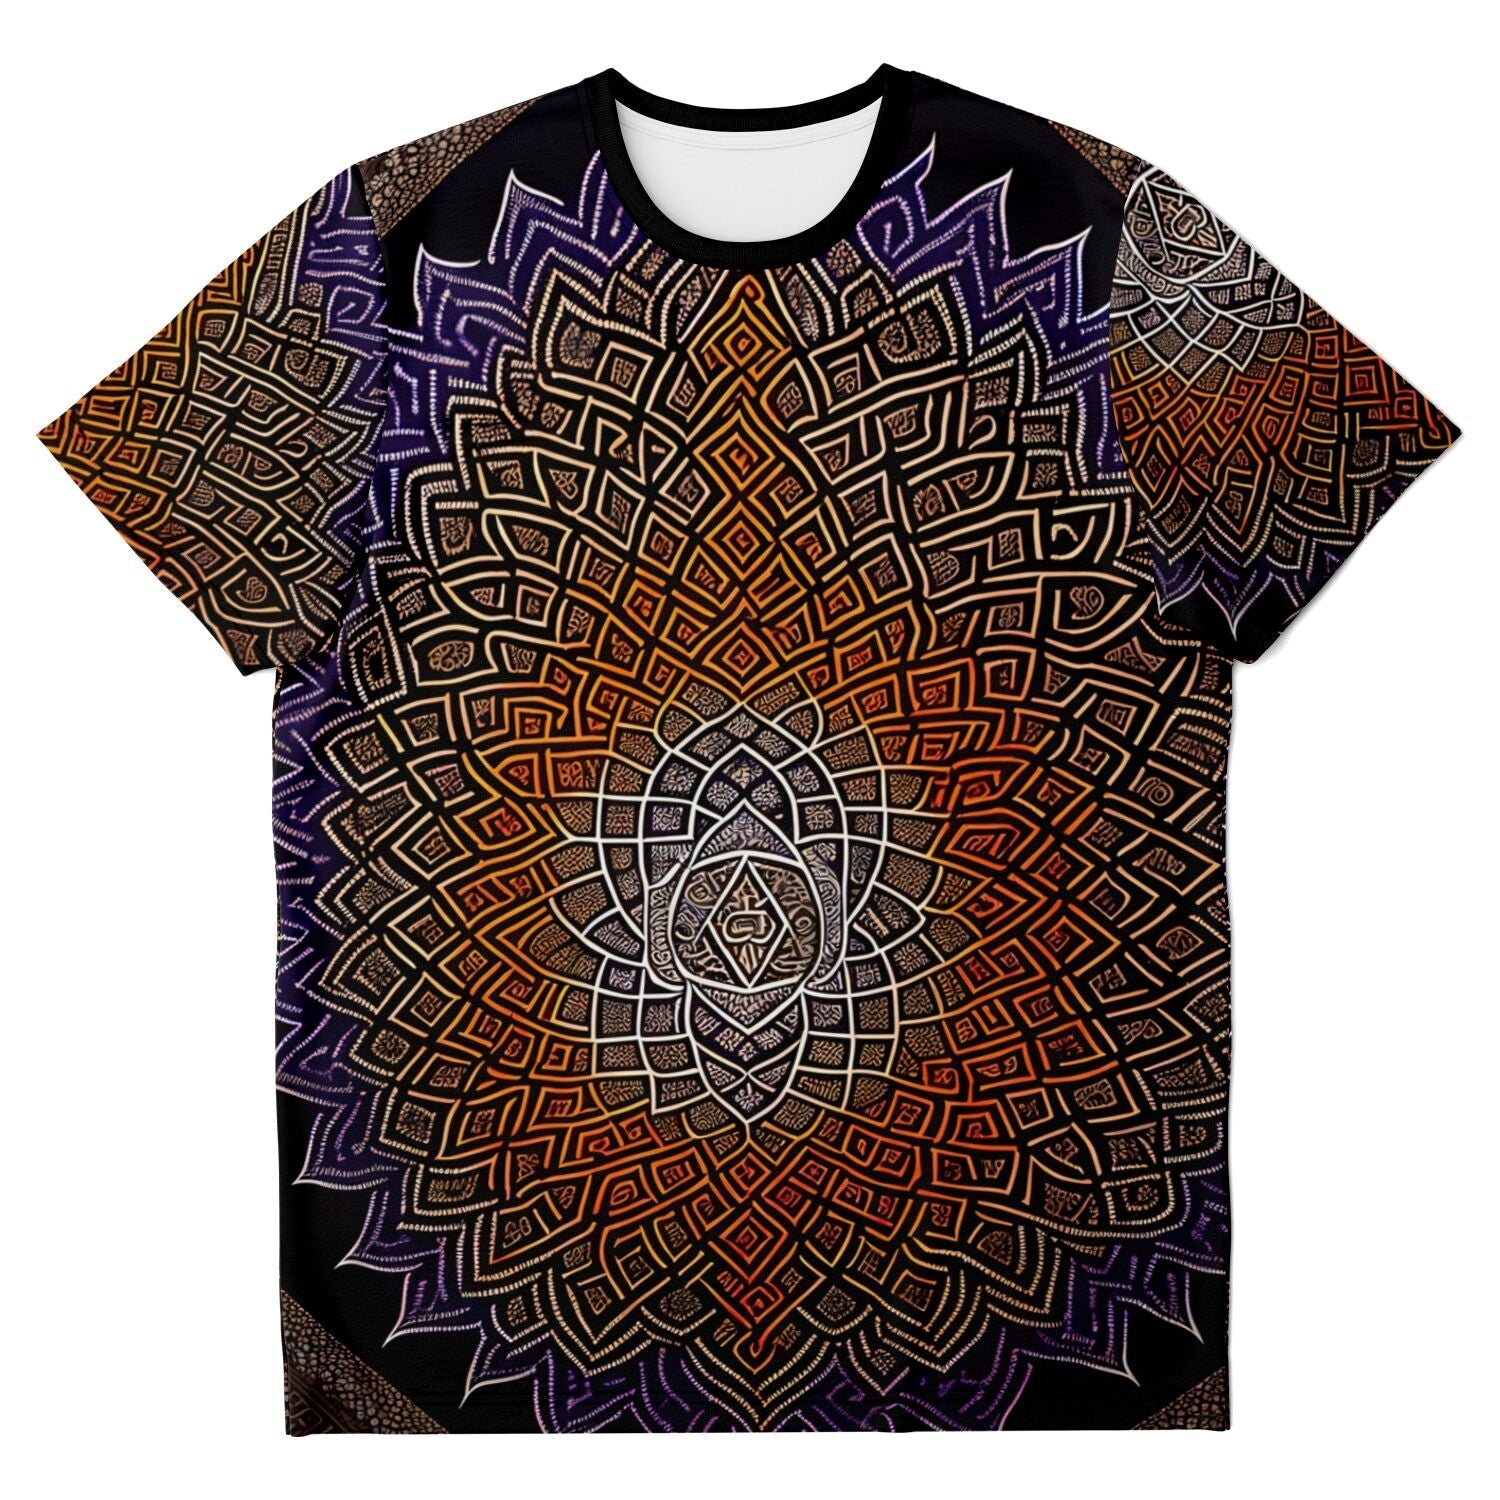 T-shirt XS Wisdom and Illusion Trippy Tee | Psychedelic Sacred Geometry | Abstract Cosmic Organic Mandala Mystic Graphic Art T-Shirt